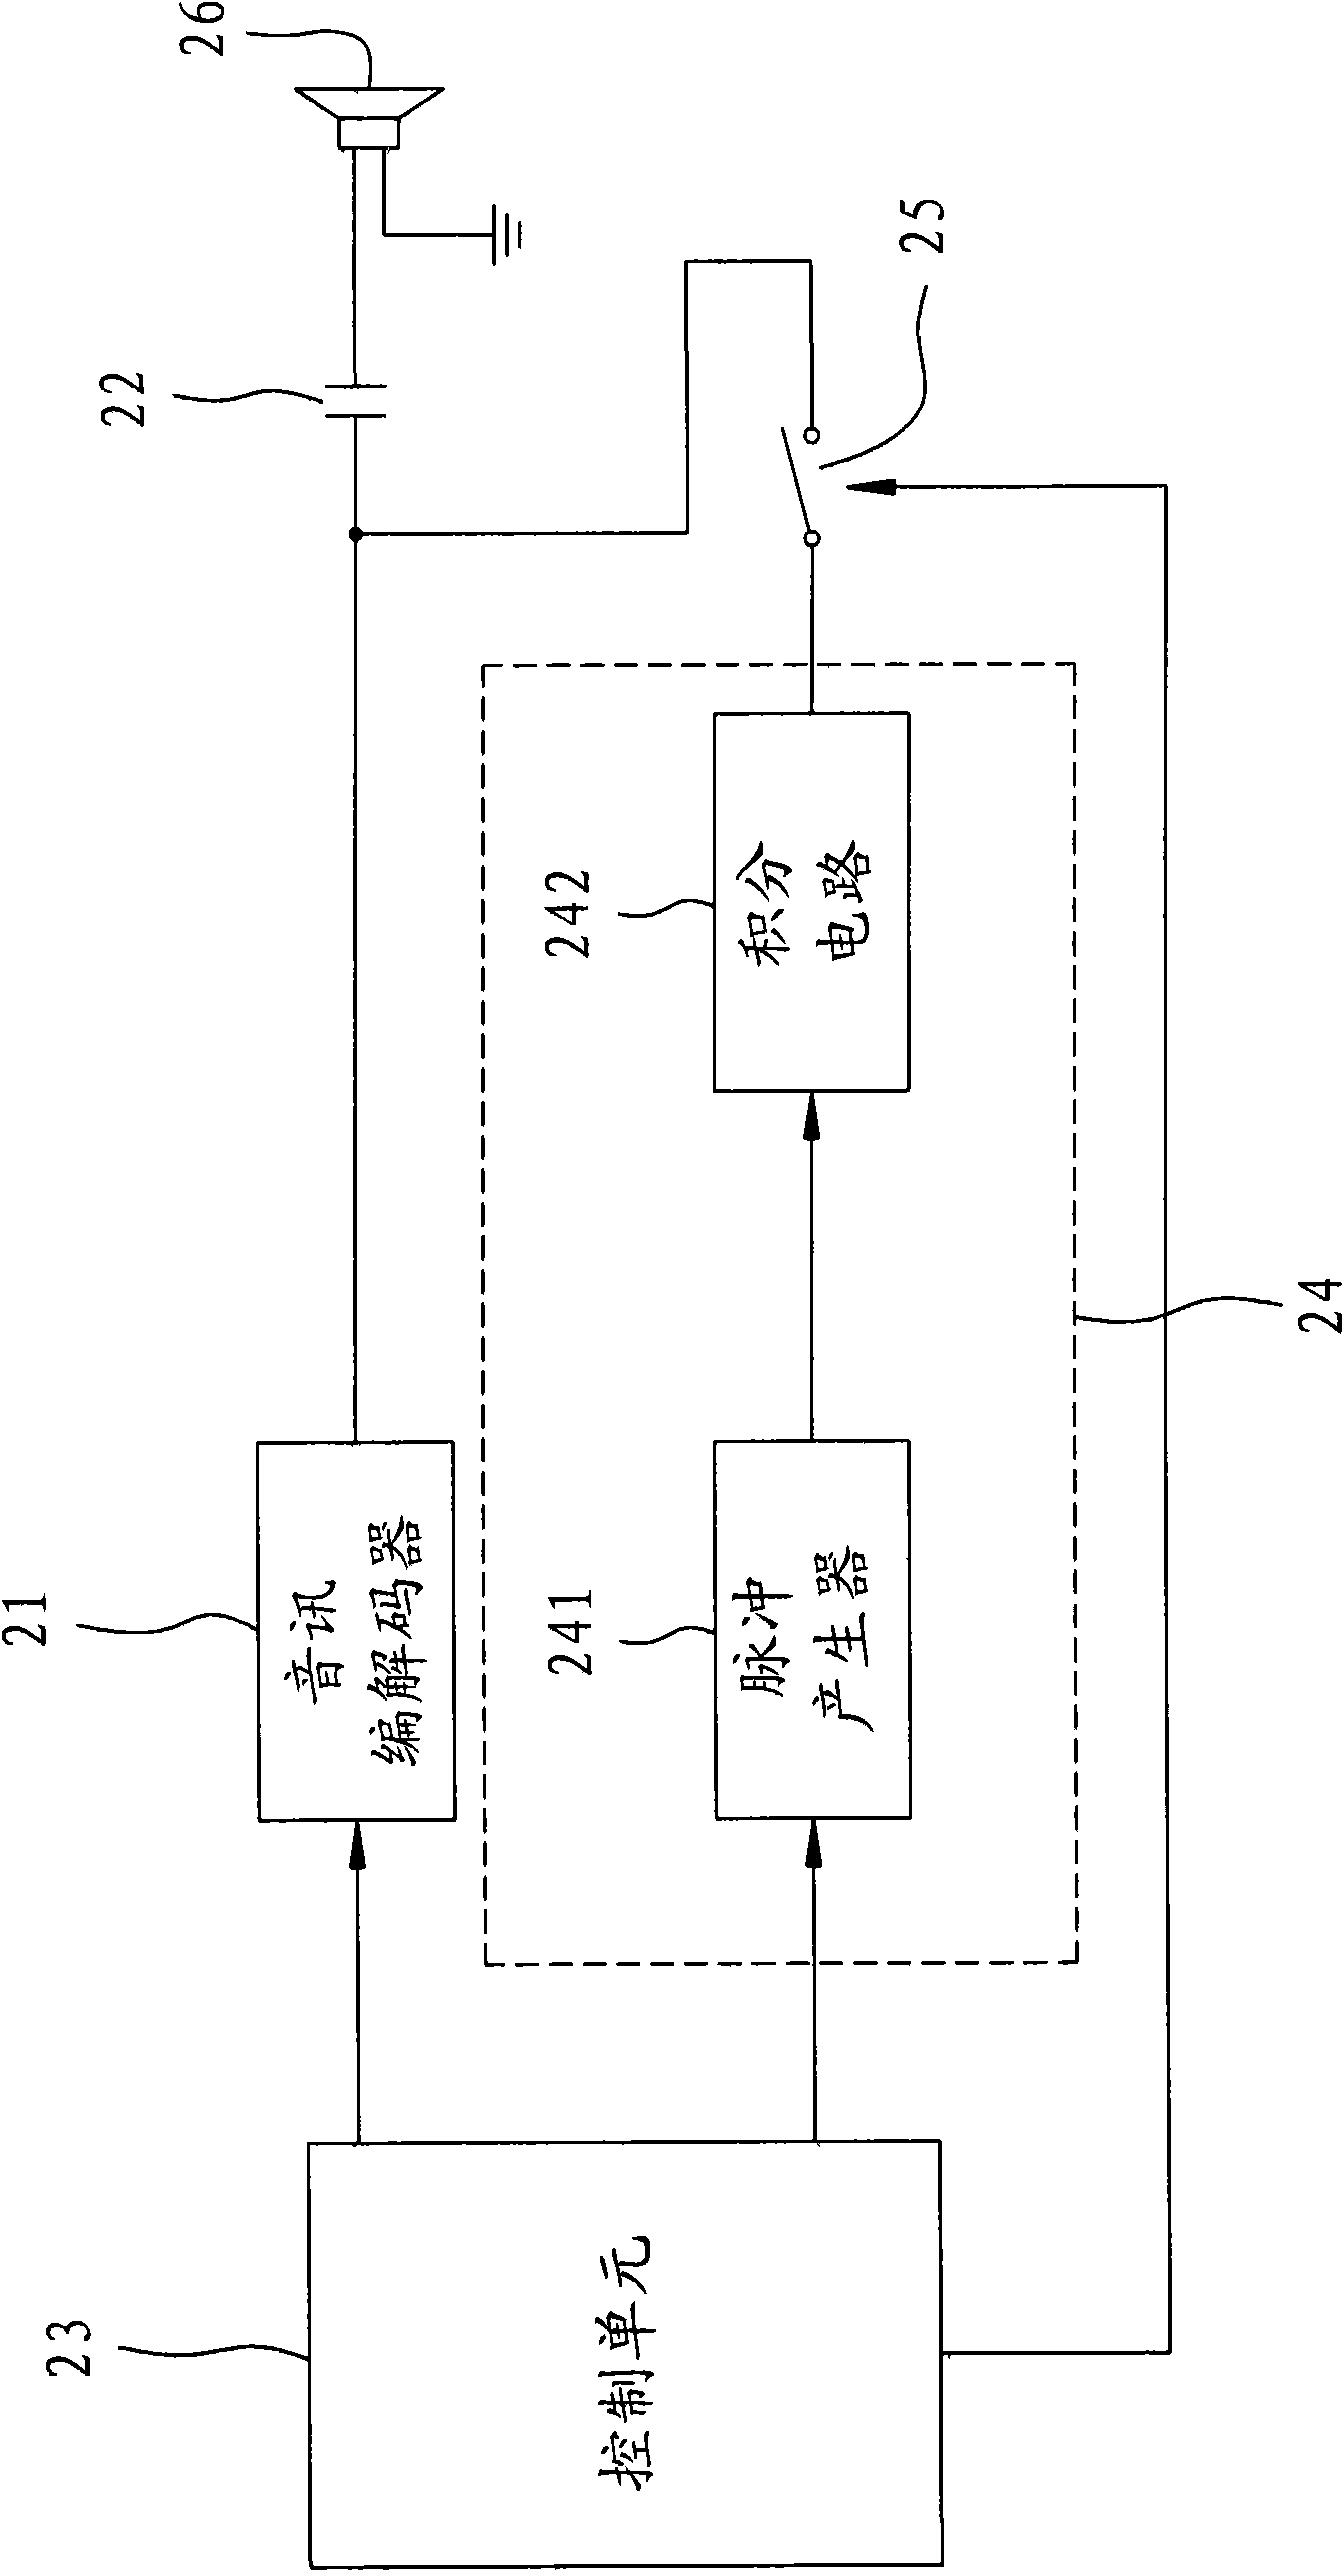 Audio output device for preventing crackle